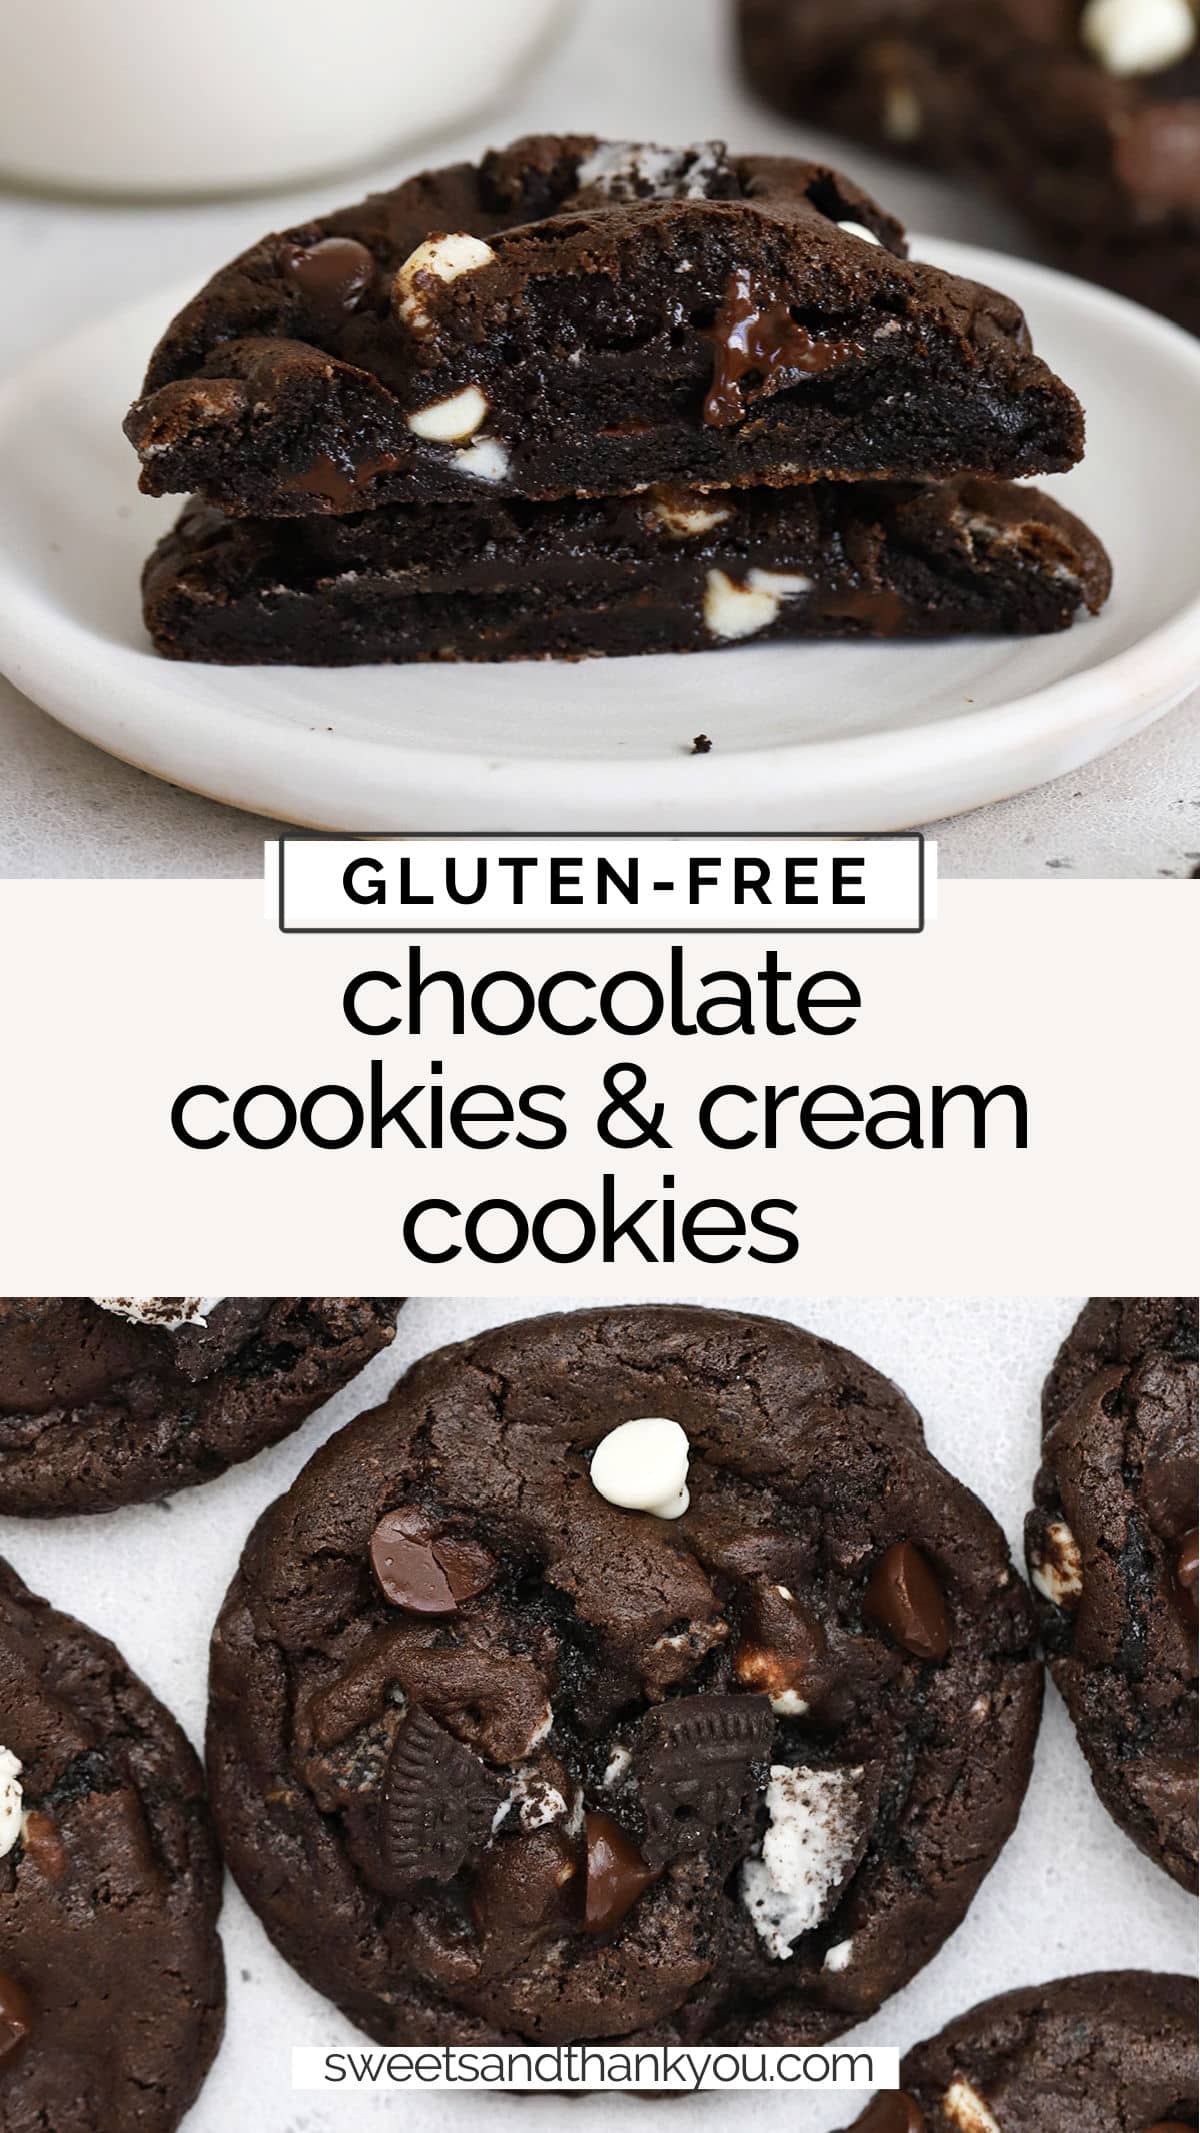 Gluten-Free Chocolate Cookies & Cream Cookies - Fudgy gluten-free chocolate cookies with gluten-free Oreos and TWO kinds of chocolate chips! They're chocolate-vanilla heaven! gluten-free chocolate vanilla cookies / gluten free cookies and cream cookies / gluten free black and white cookies / gluten free chocolate cookies with white chocolate chips // gluten free triple chocolate cookies / gluten free cookie recipe / gluten-free chocolate cookie recipe / gluten free cookies and cream recipe 